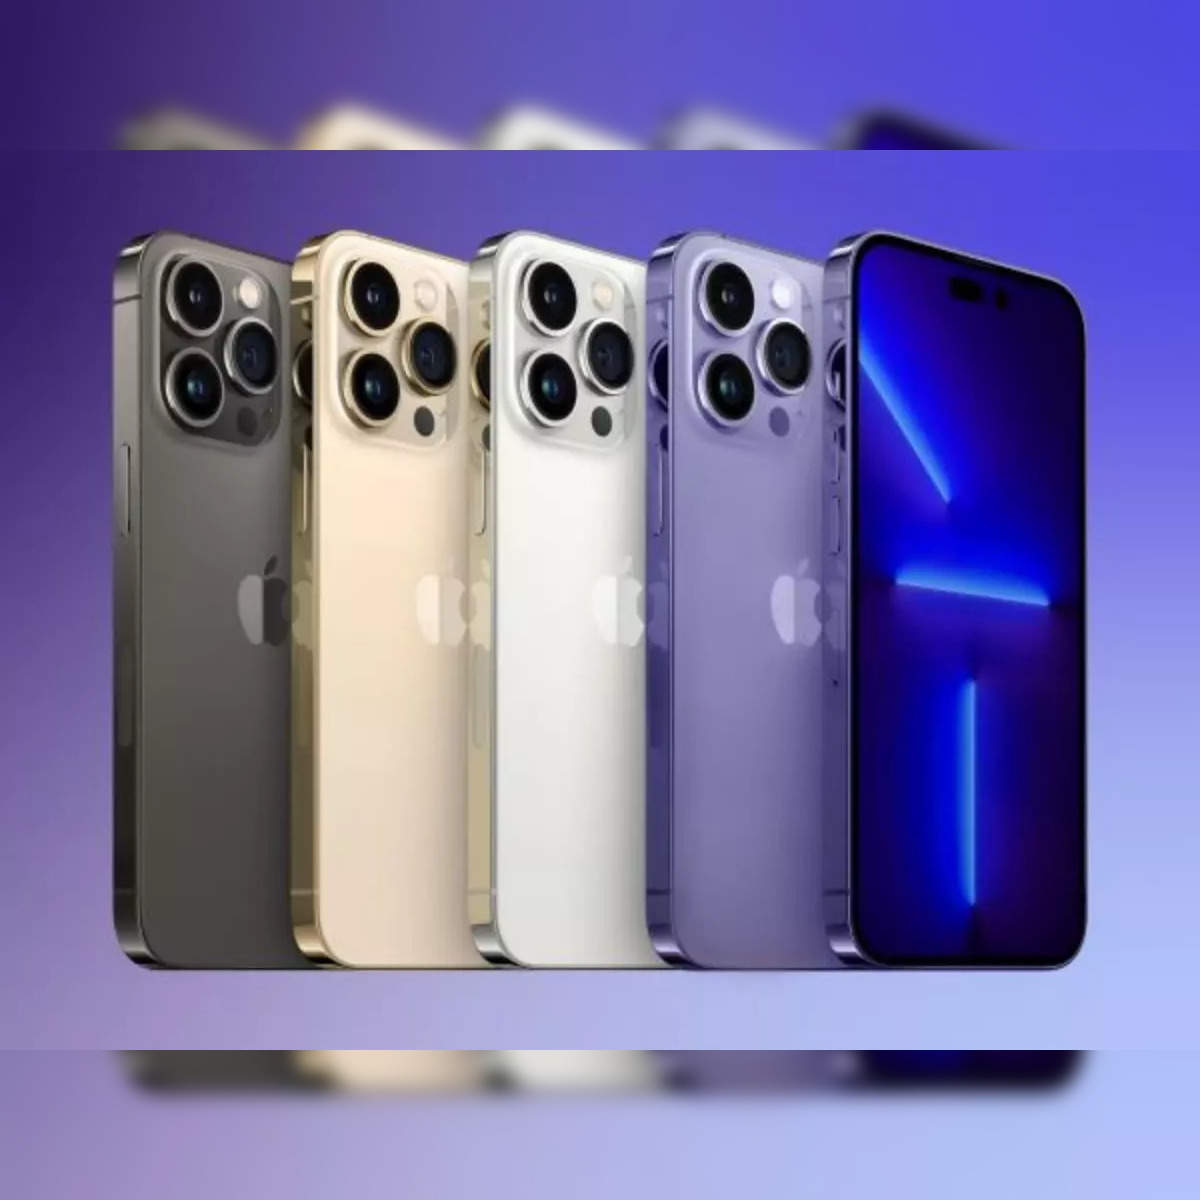 Apple IPhone 13 Pro Max Price Revealed Before The Launch Of IPhone